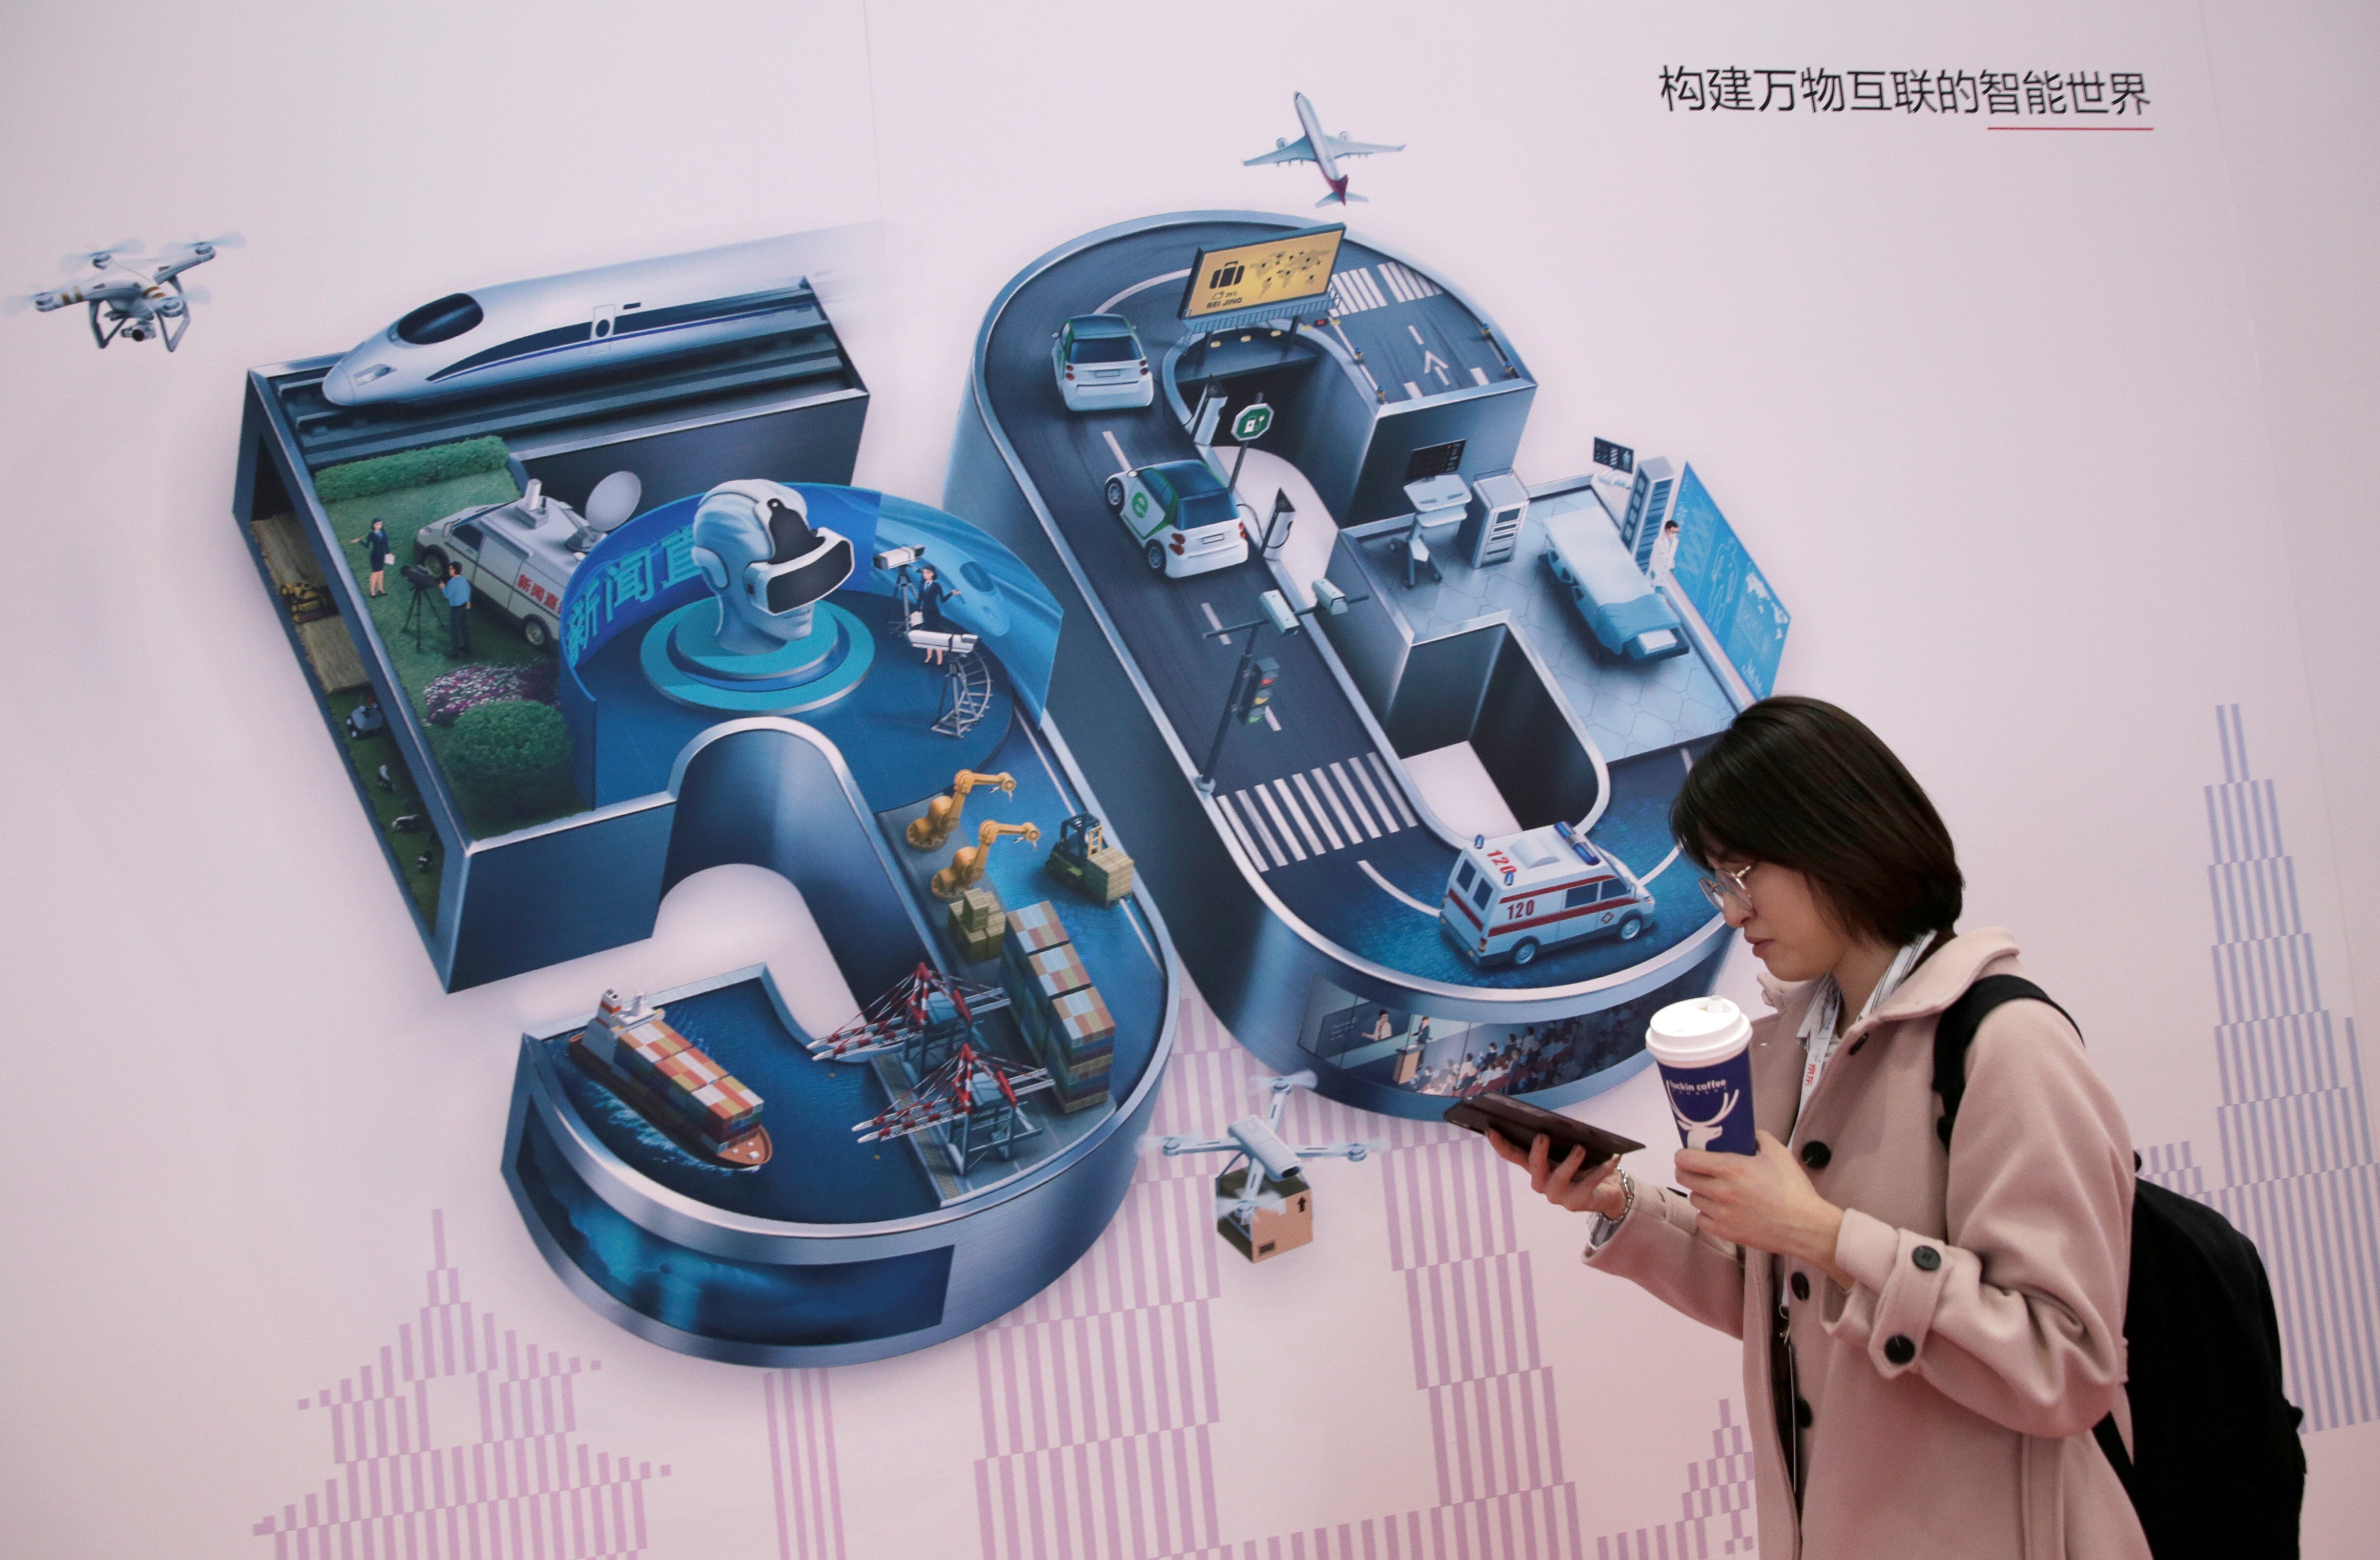 A sign for 5G is seen at the World 5G Exhibition in Beijing, China November 22, 2019. Photo: Reuters